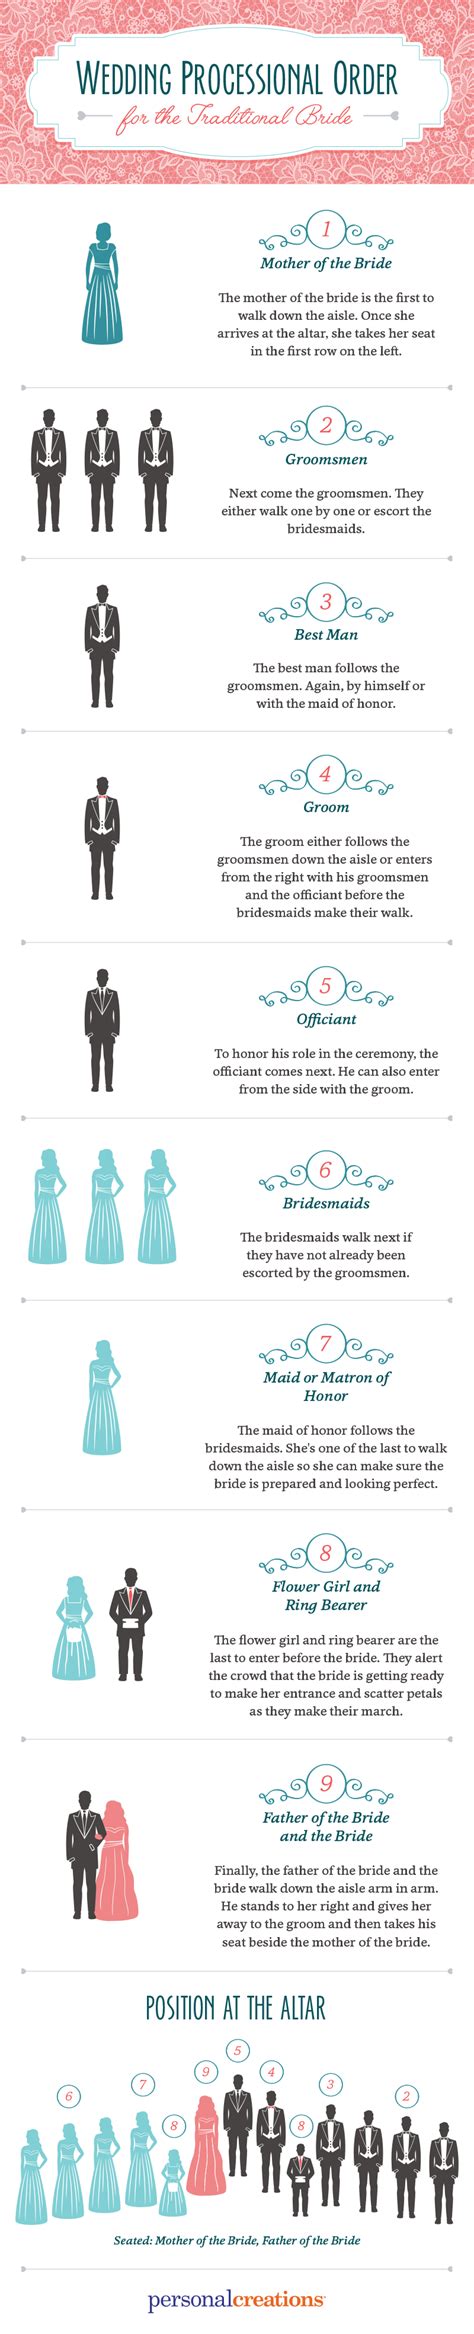 Processional Definition For Wedding Ceremony